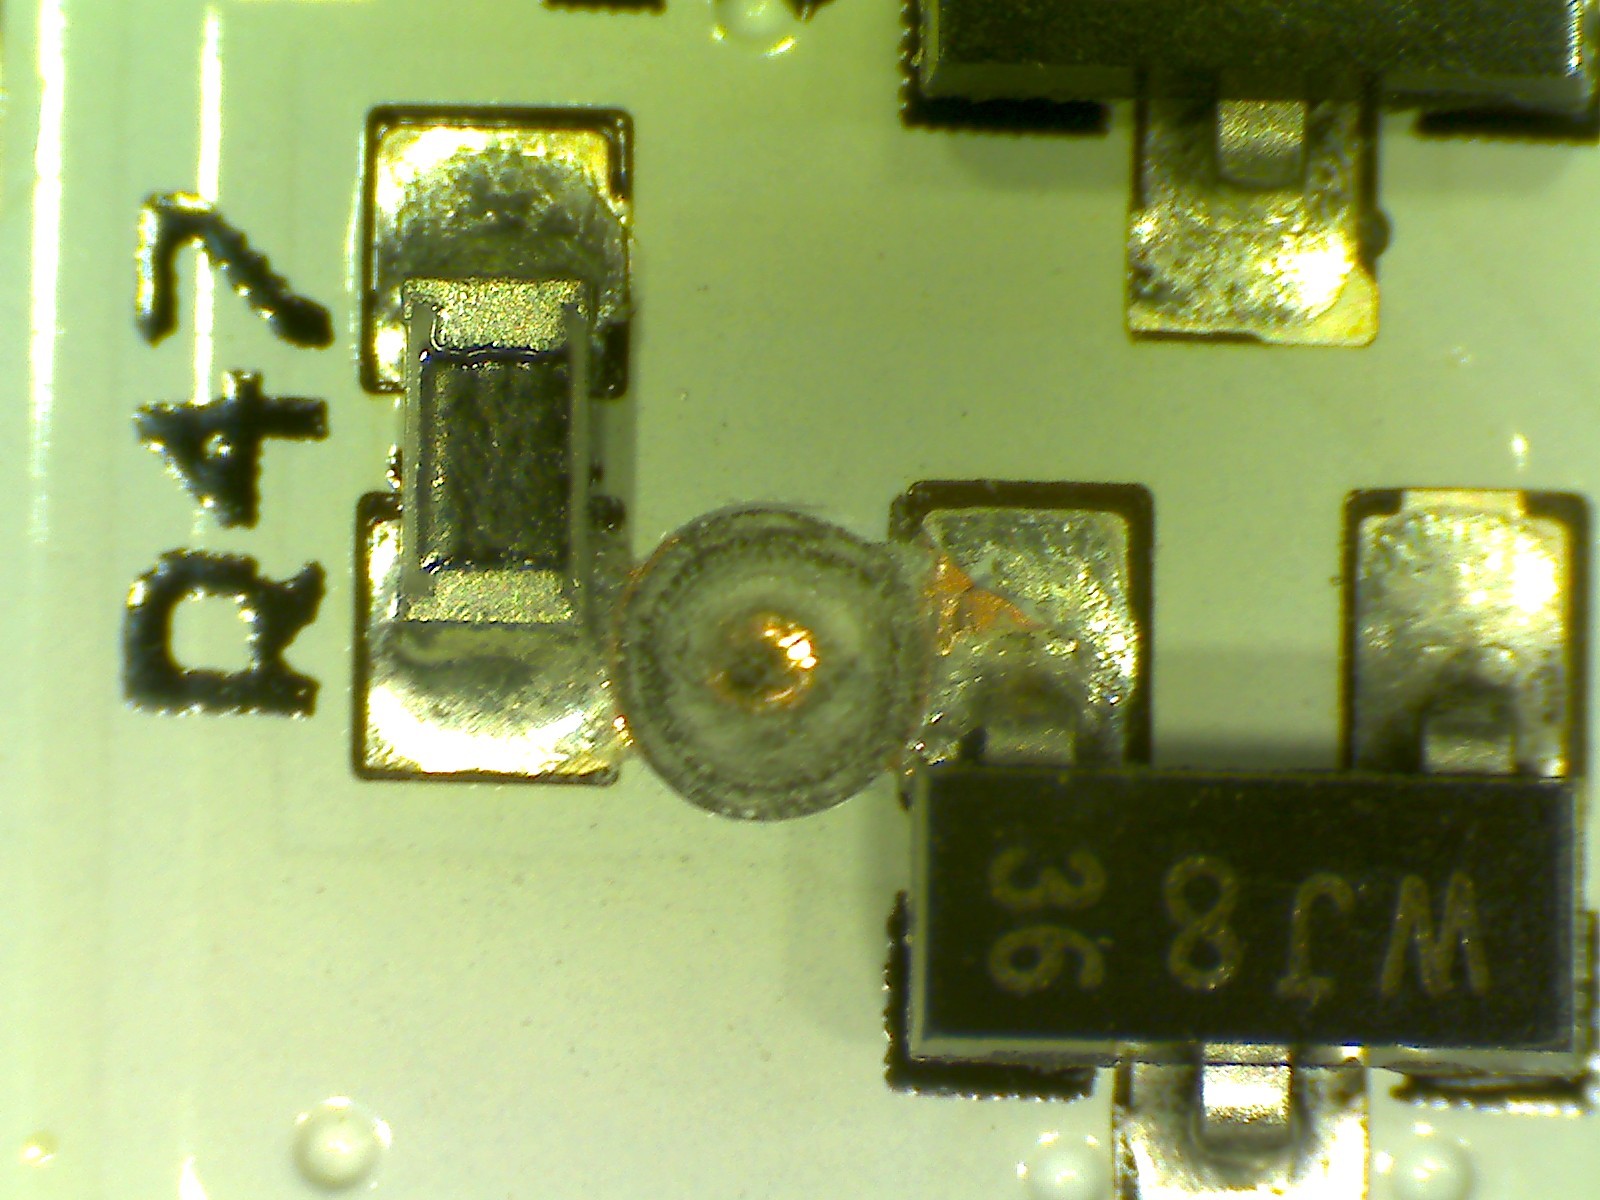 A drilled-out via (to break the connection) between a 0603 resistor and SOT-23-3 MOSFET.